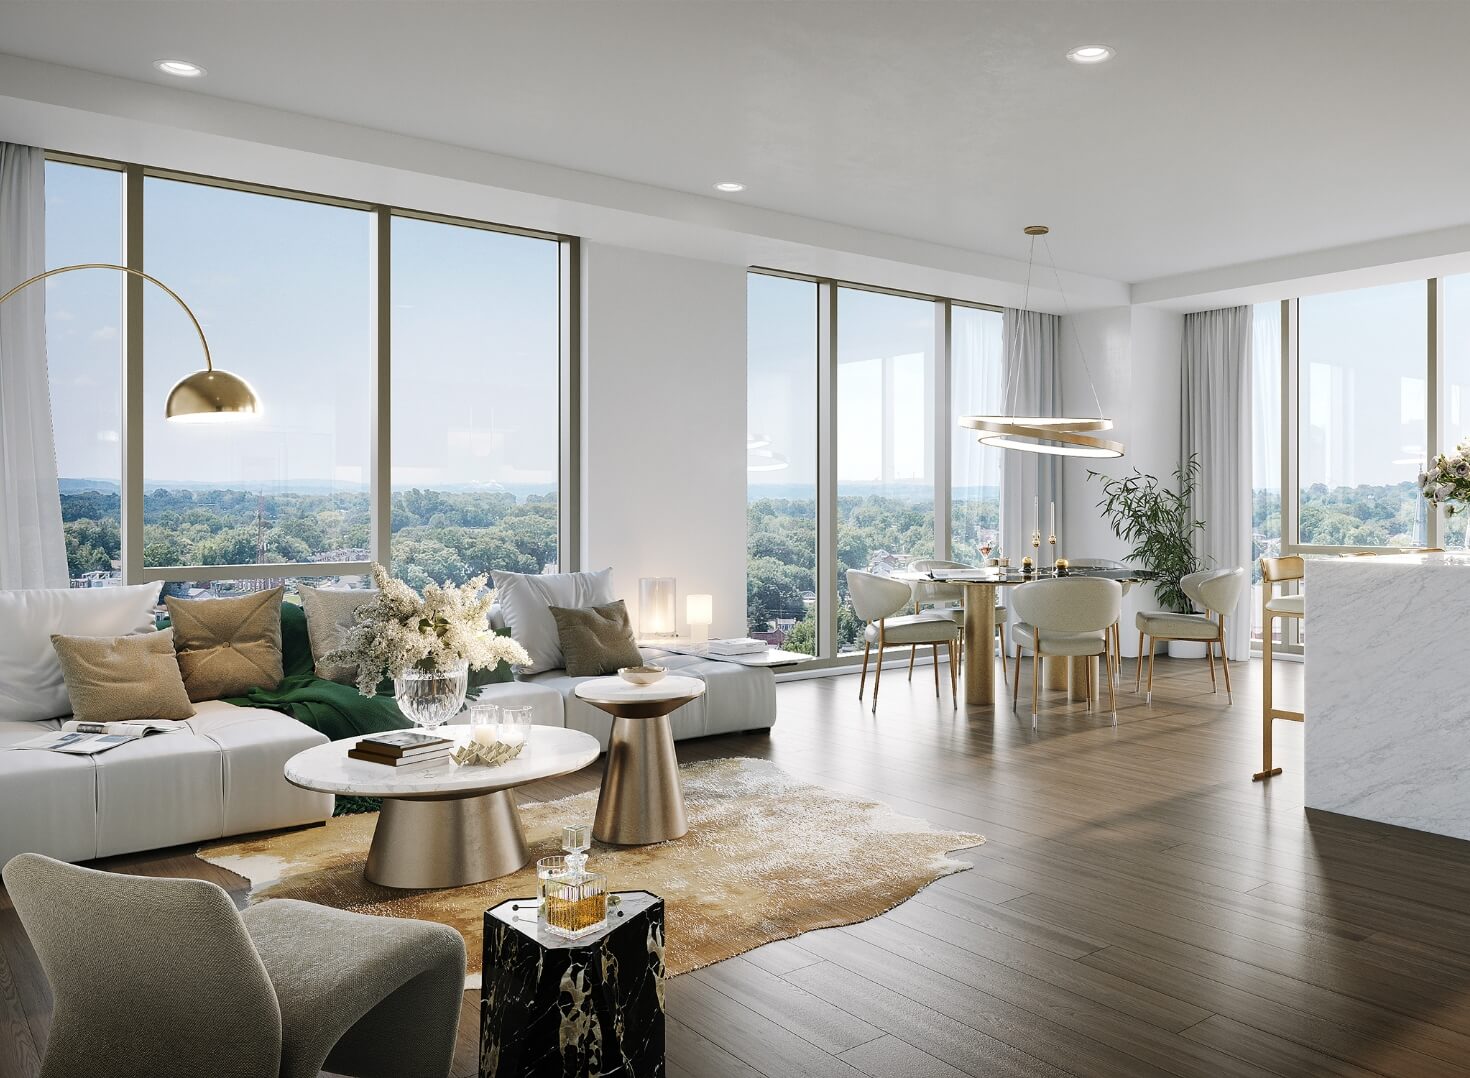 An Independent Living room complimented by large windows, offering a stunning view of the city.